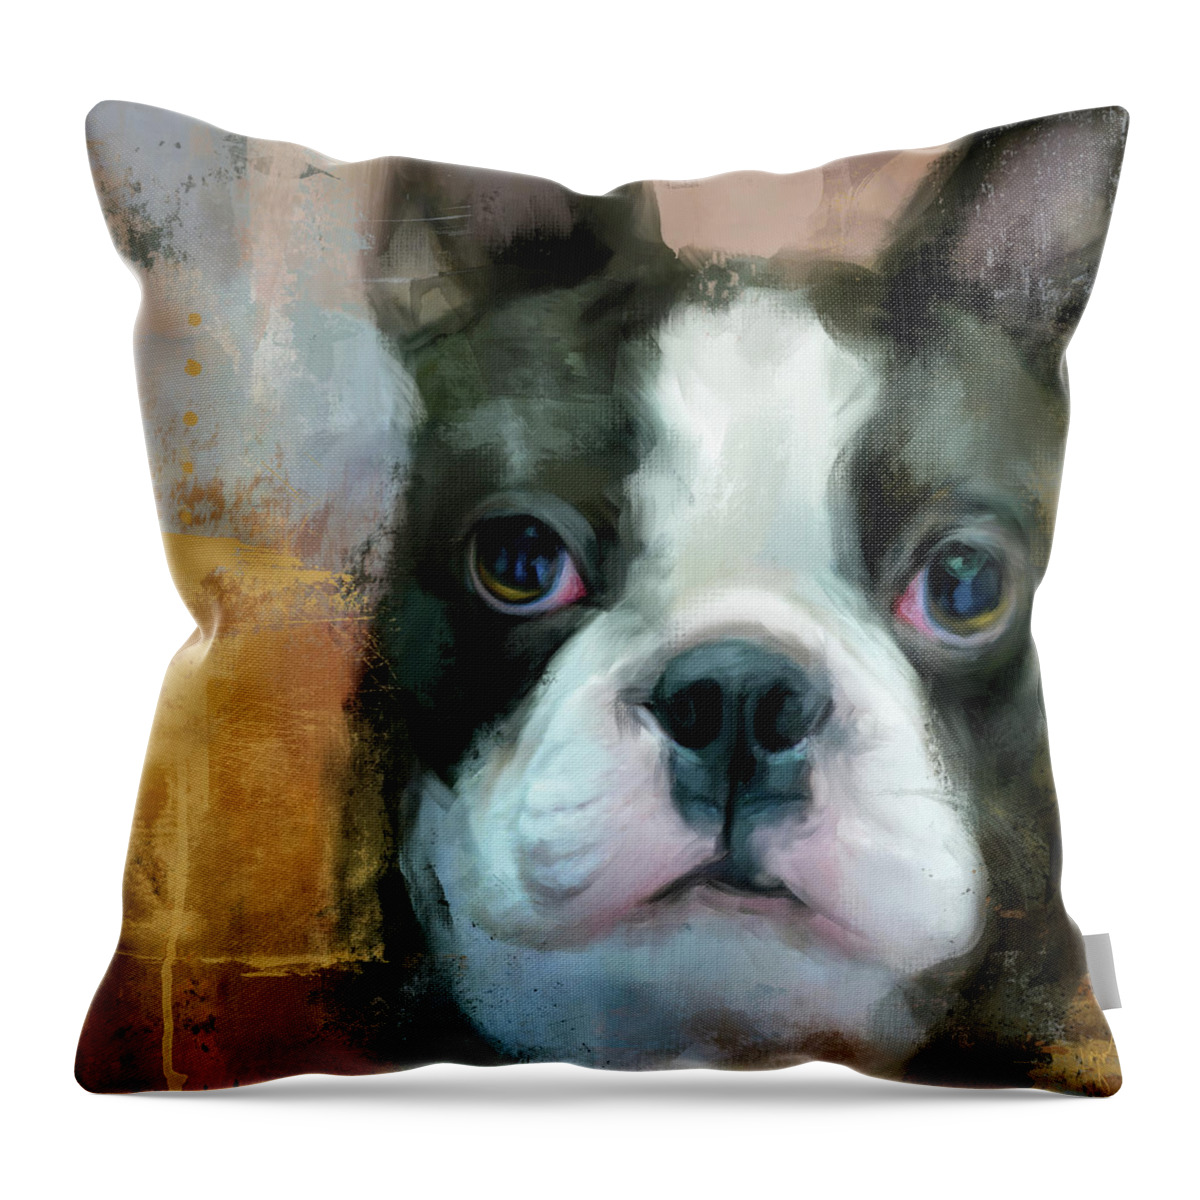 Colorful Throw Pillow featuring the painting I Adore You Boston Terrier Art by Jai Johnson